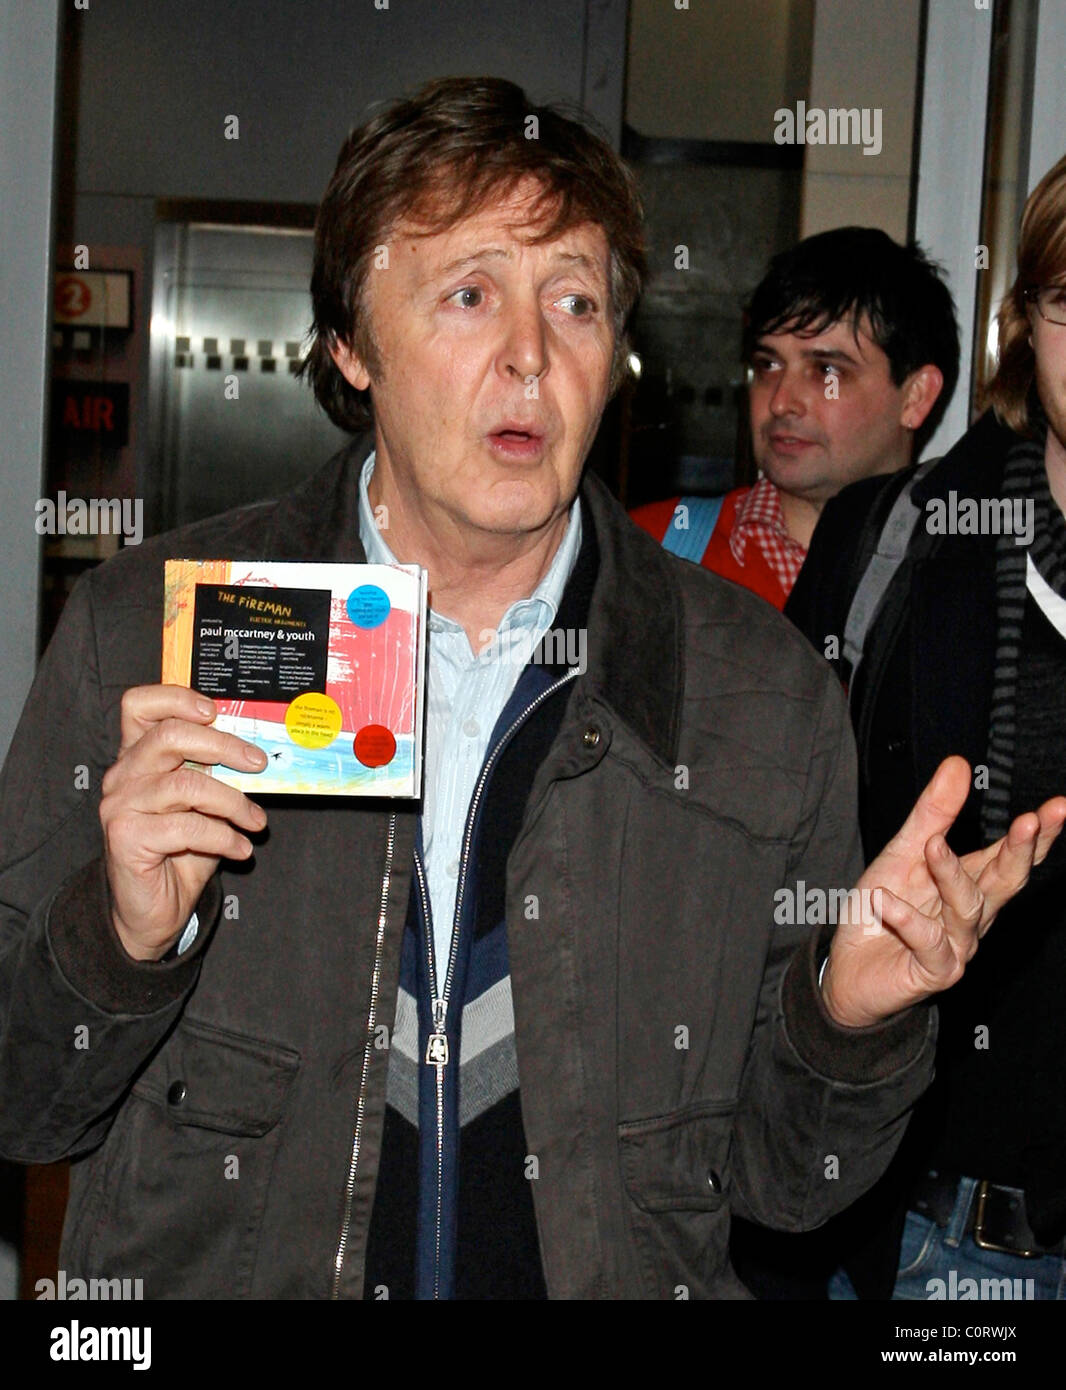 Paul McCartney holds up the new album from his band 'The Fireman' as he ...